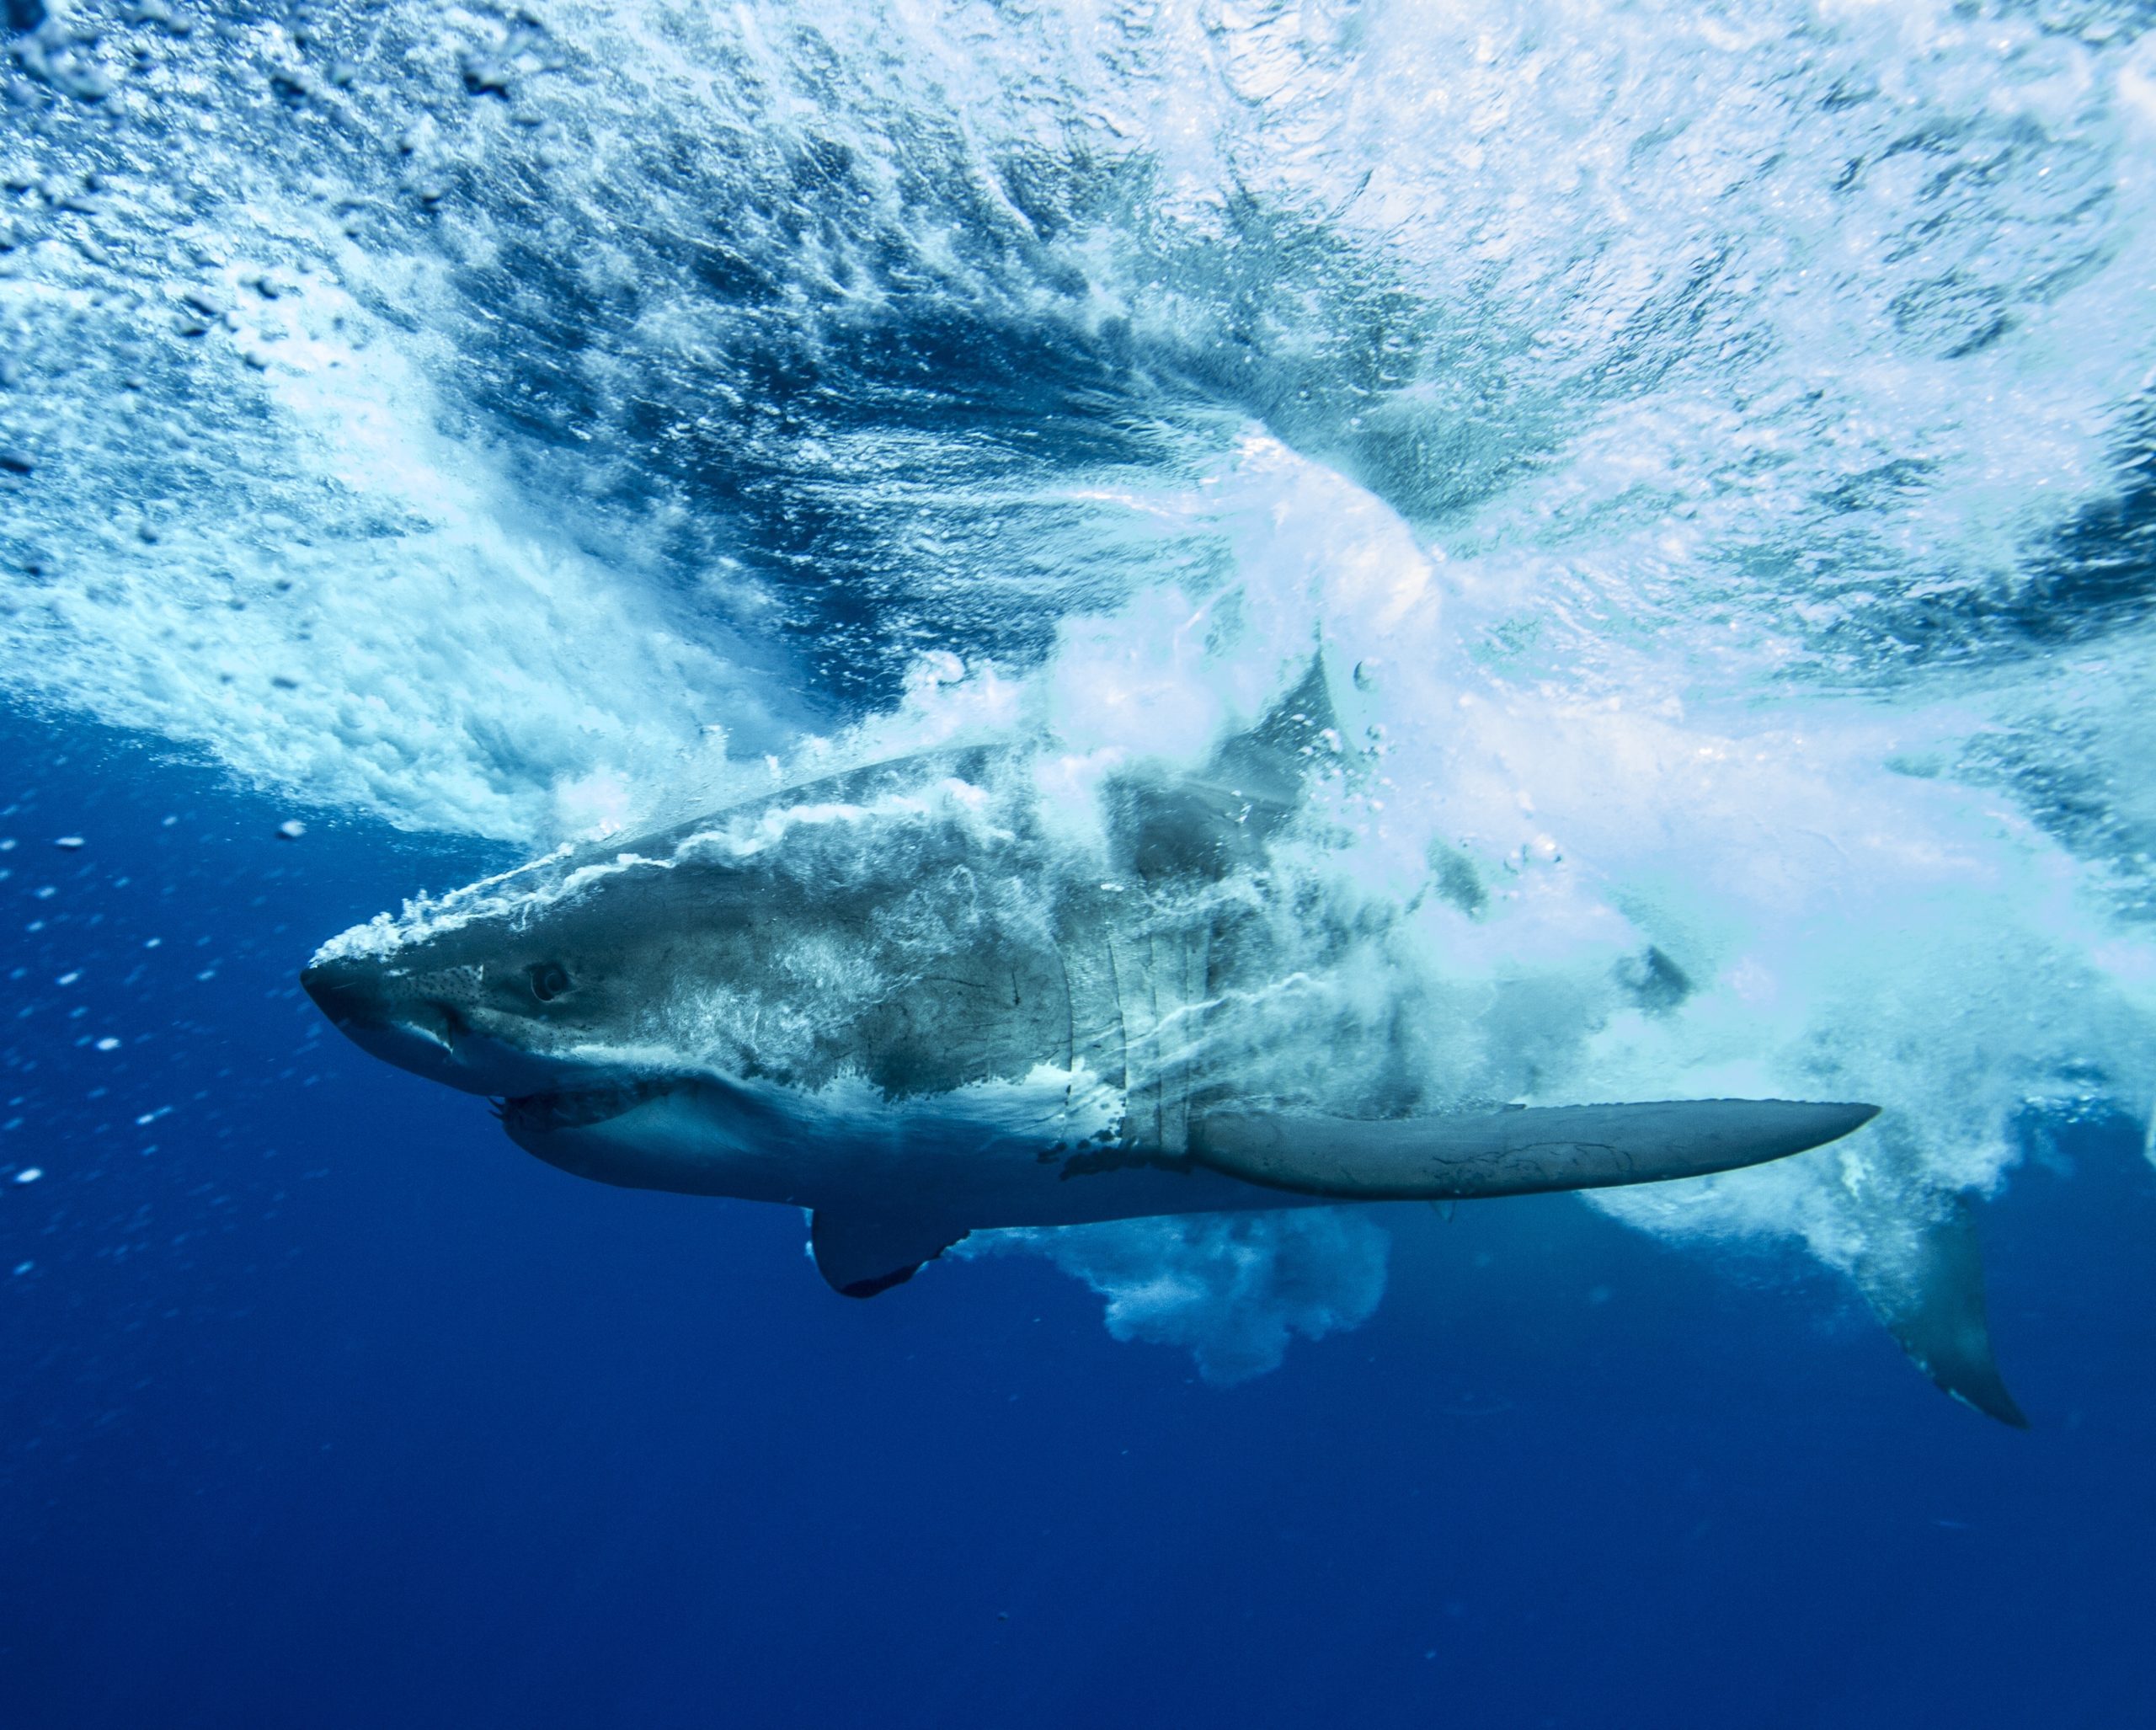 Pictures of Great White Sharks